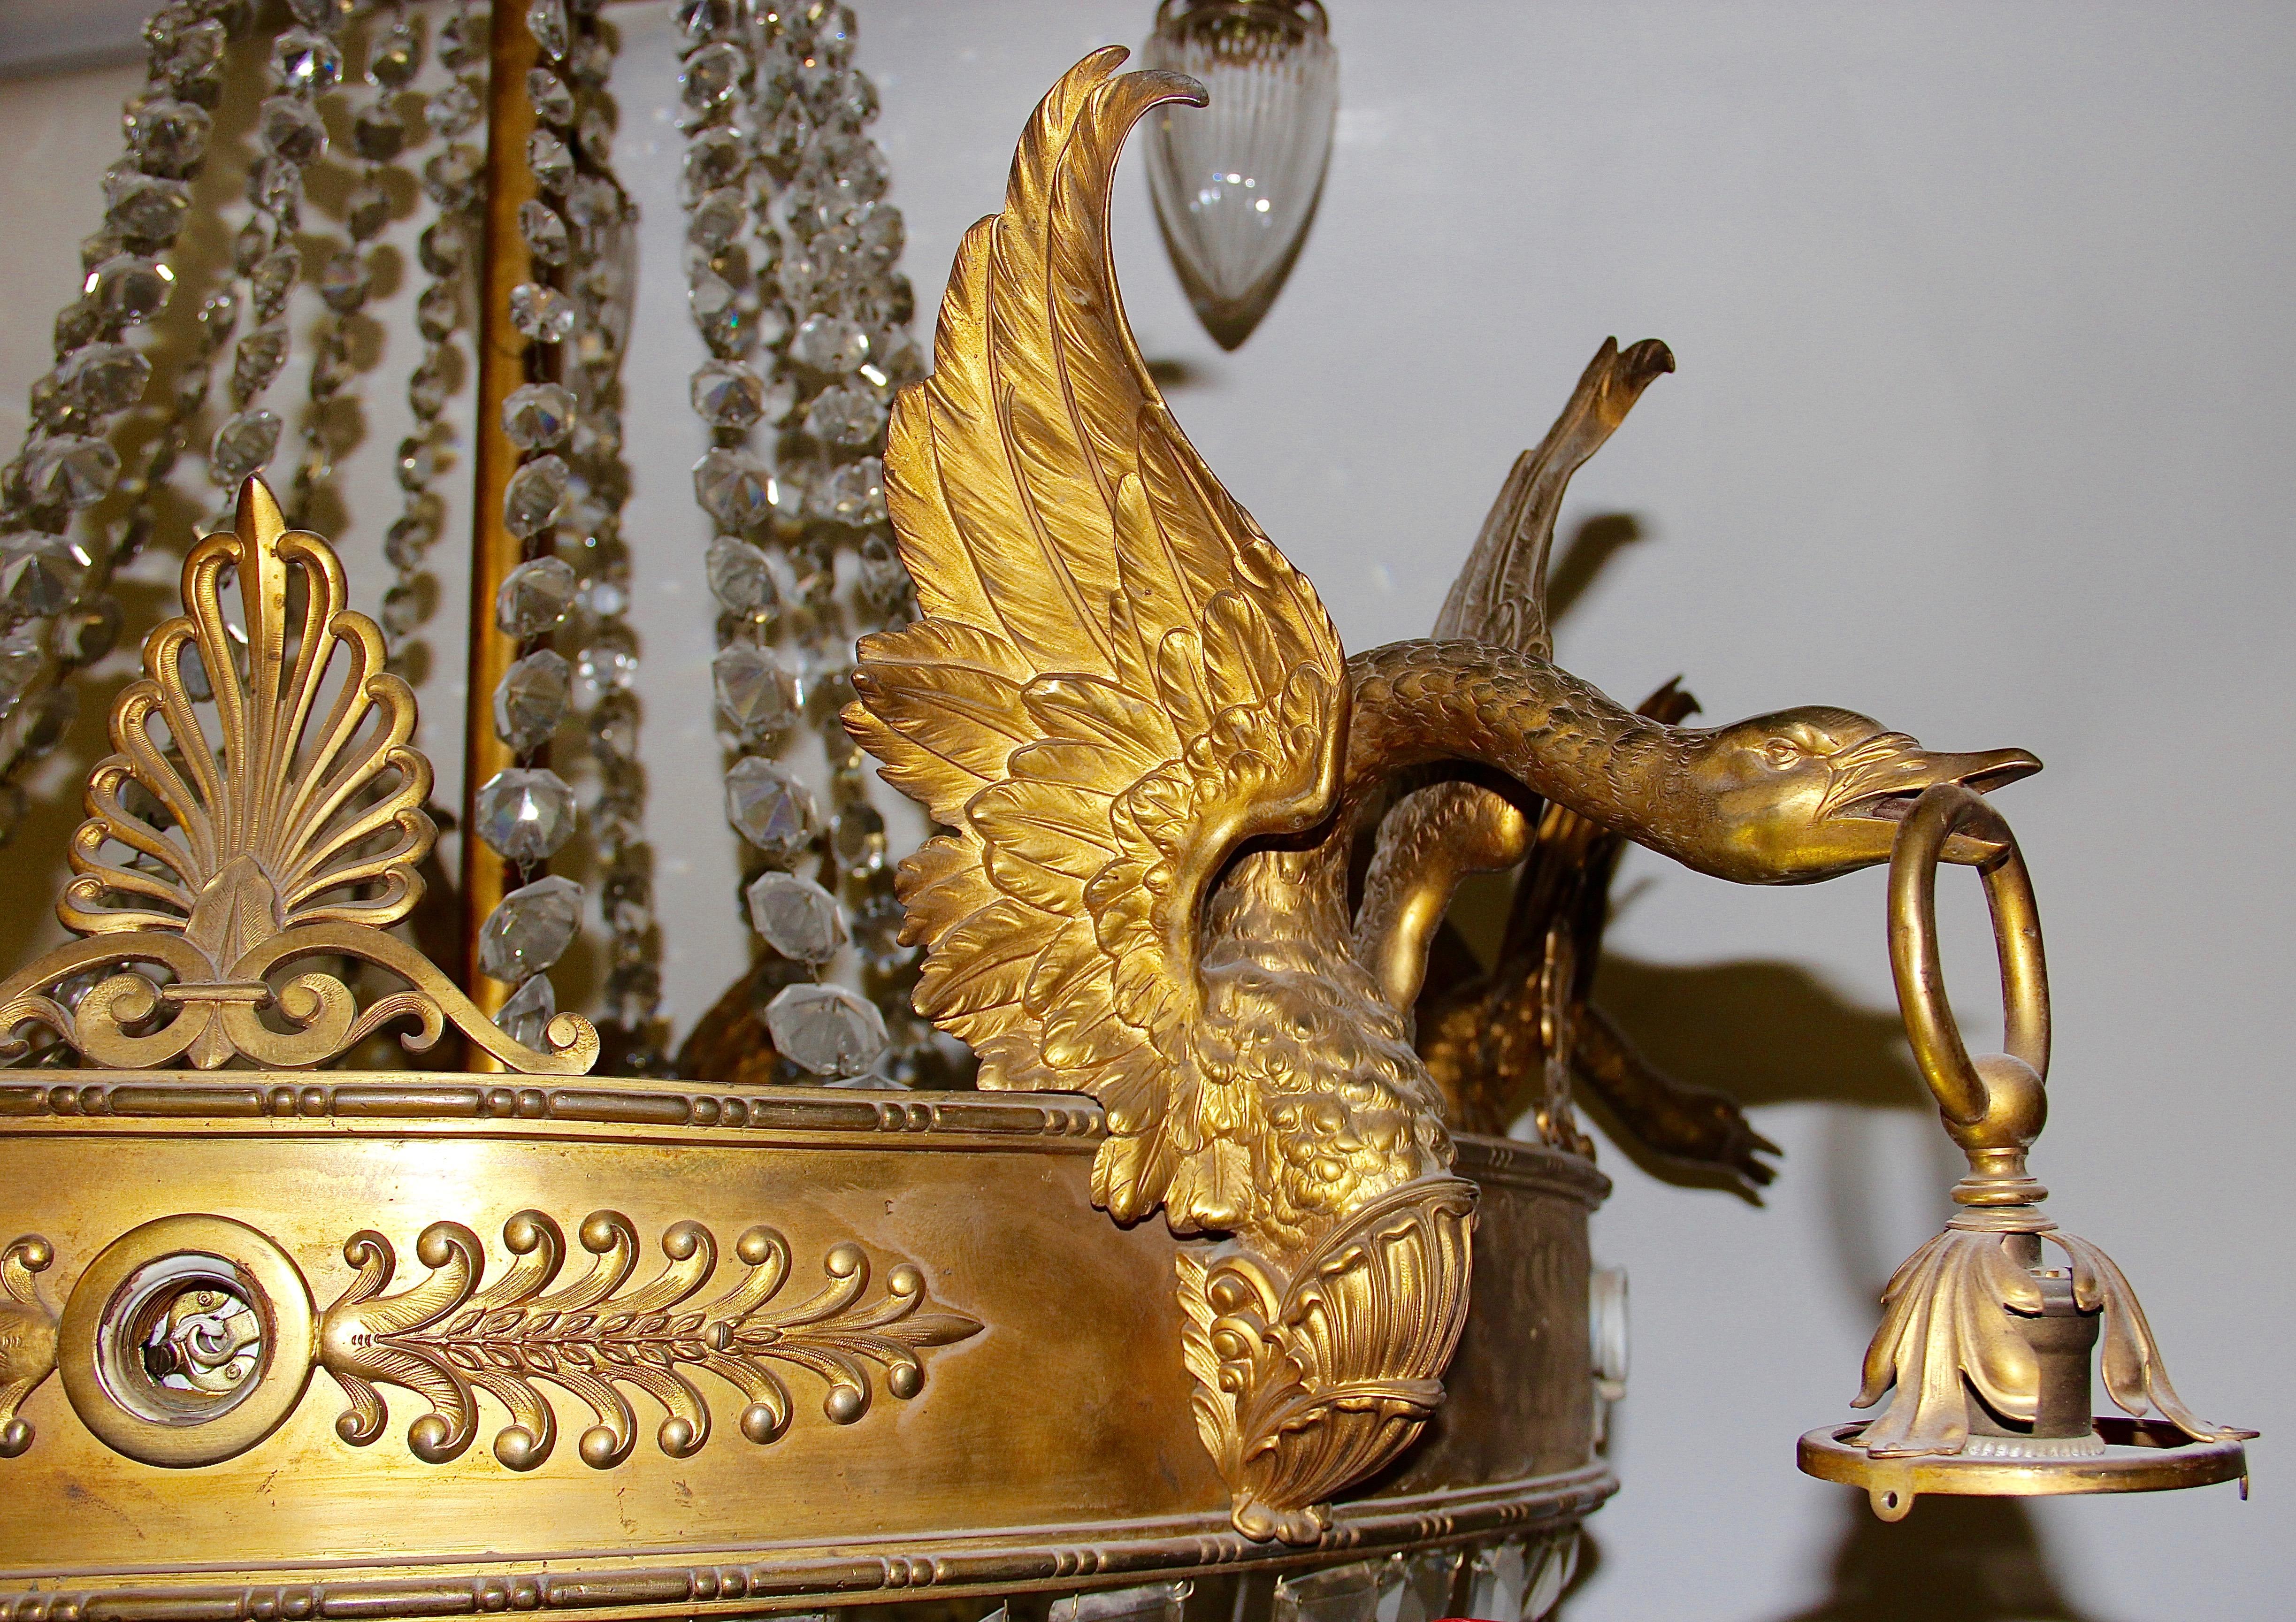 Empire Bronze Crystal Chandelier, with Fire-Gilded Swans, 19th Century For Sale 2